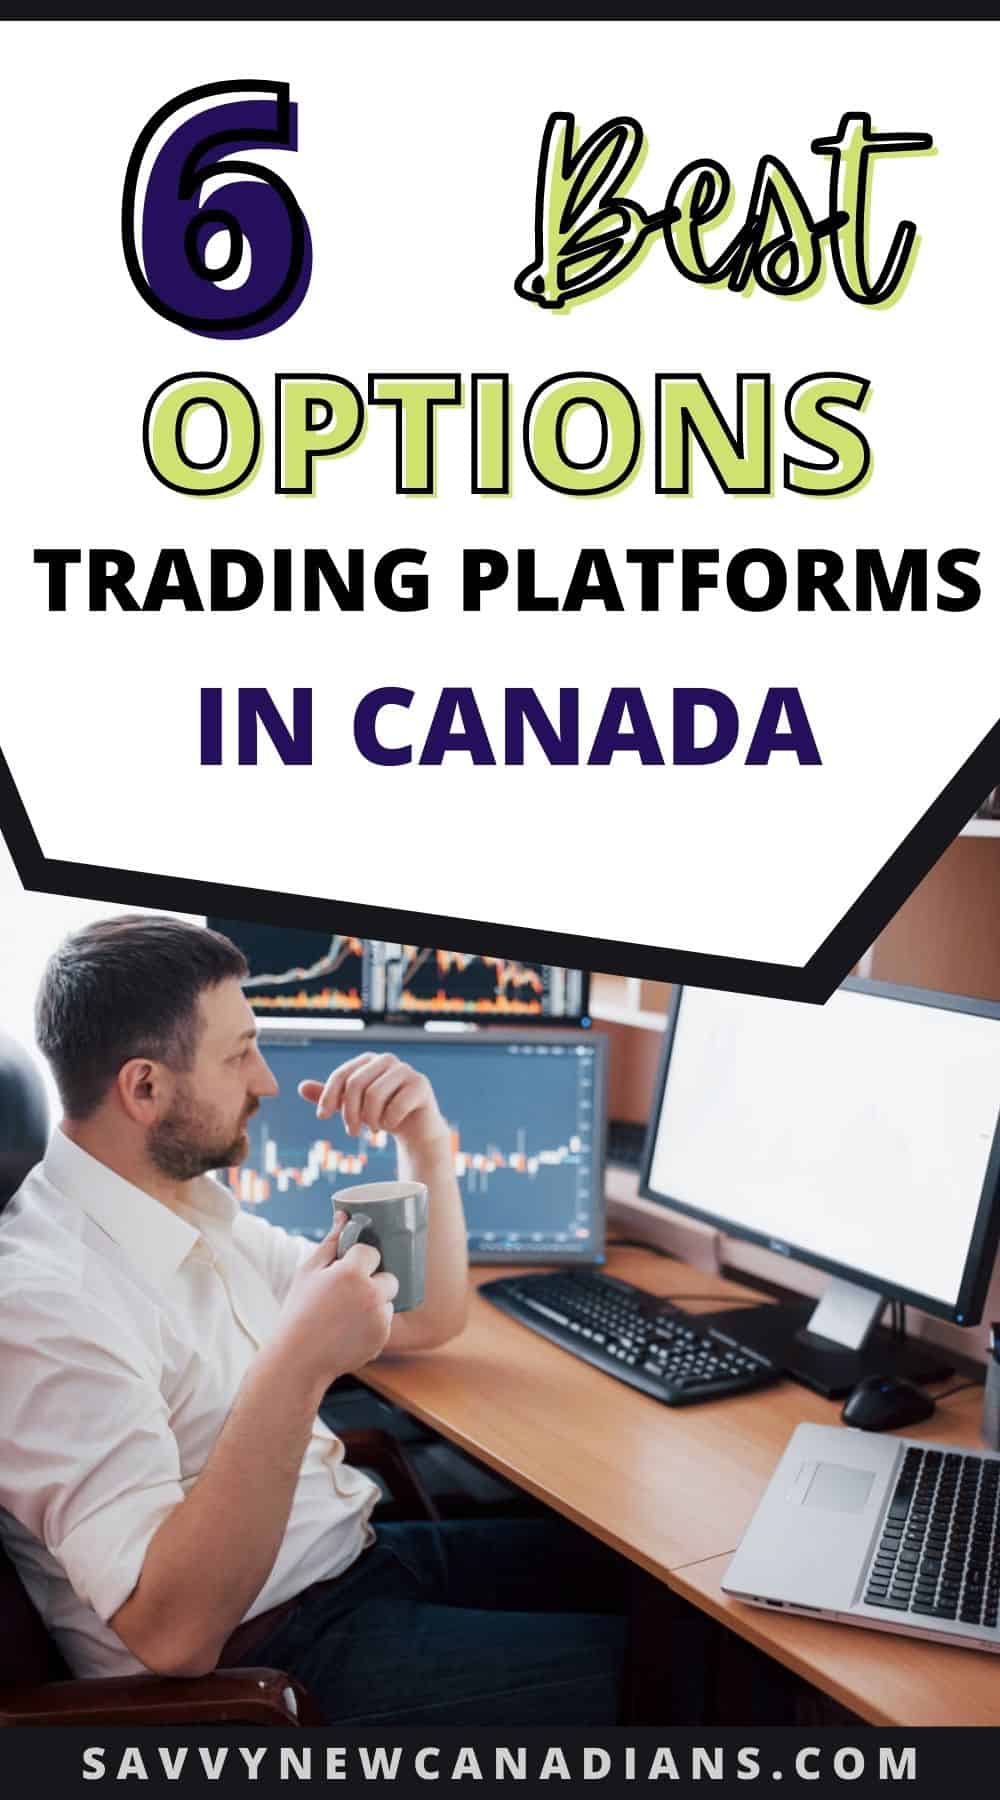 9 Best Options Trading Platforms in Canada (Aug 2022)